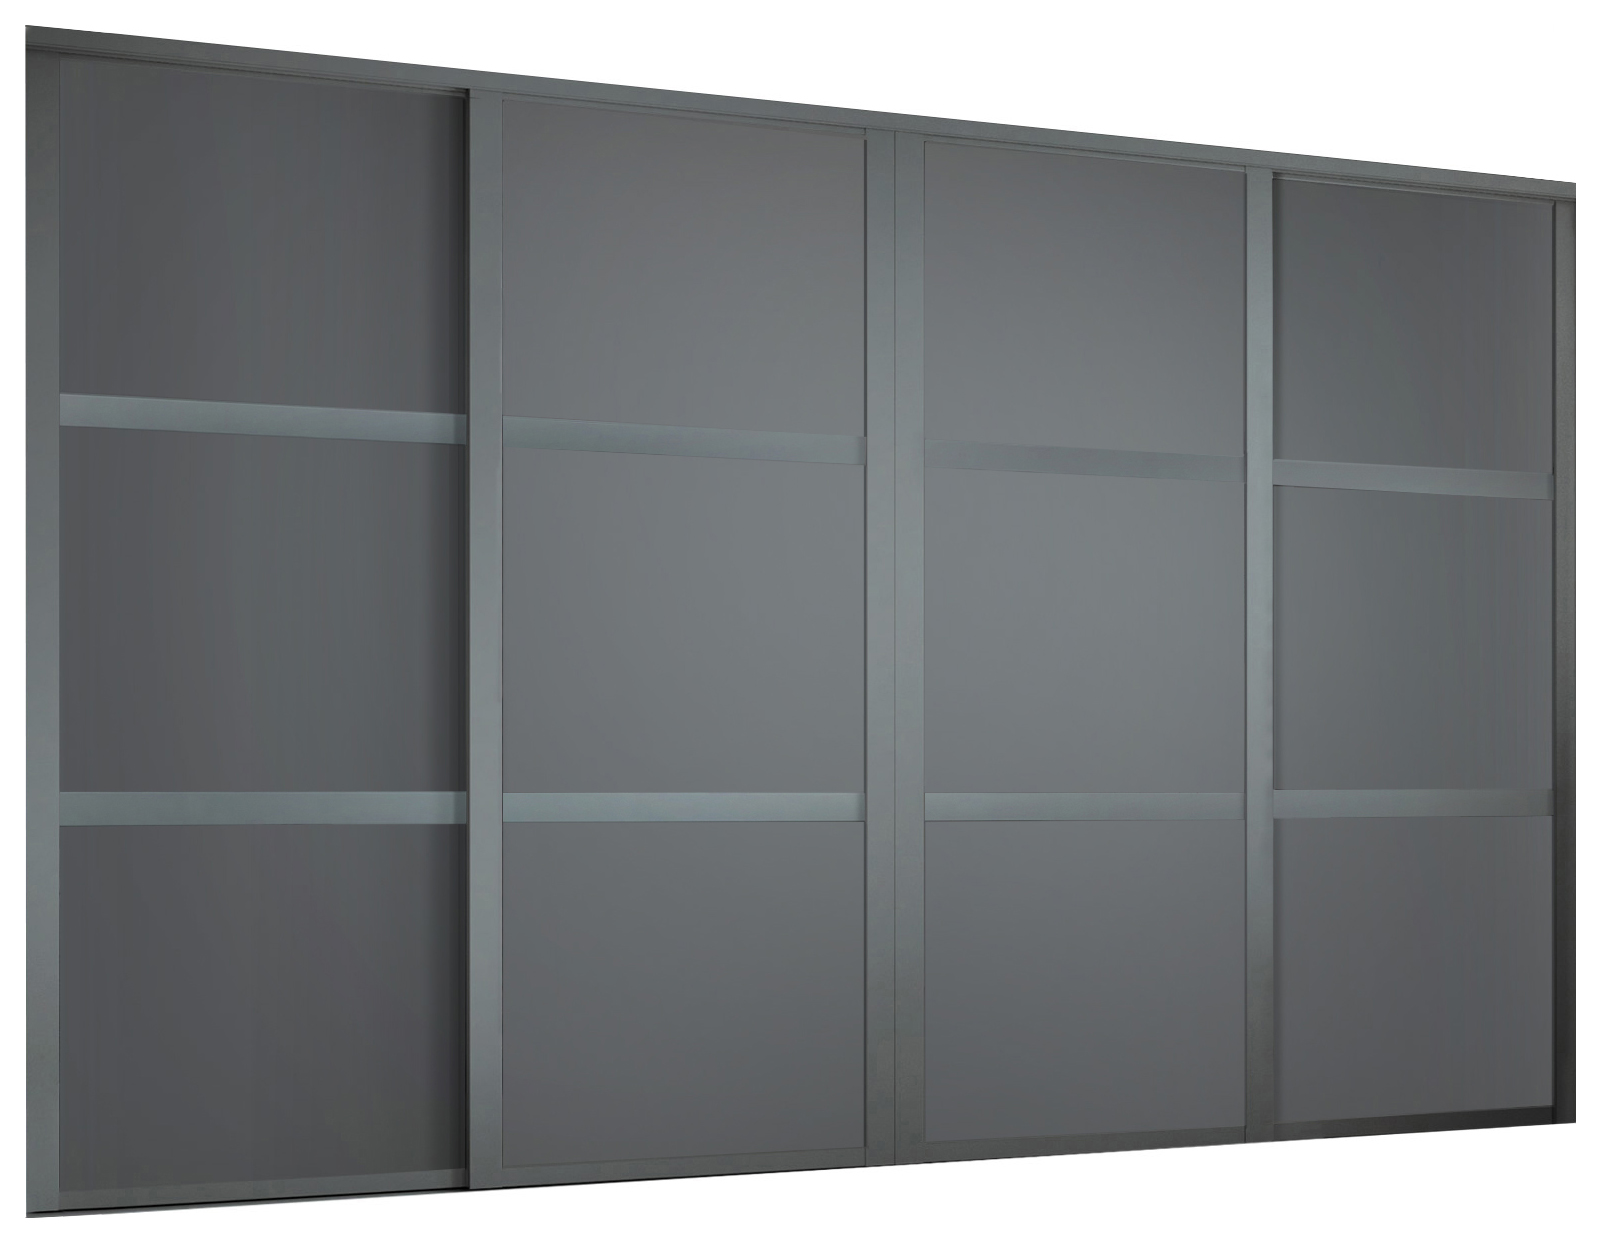 Image of Spacepro Shaker Graphite Frame 3 Panel Sliding Door Kit with Colour Matched Track - 4 x 914mm